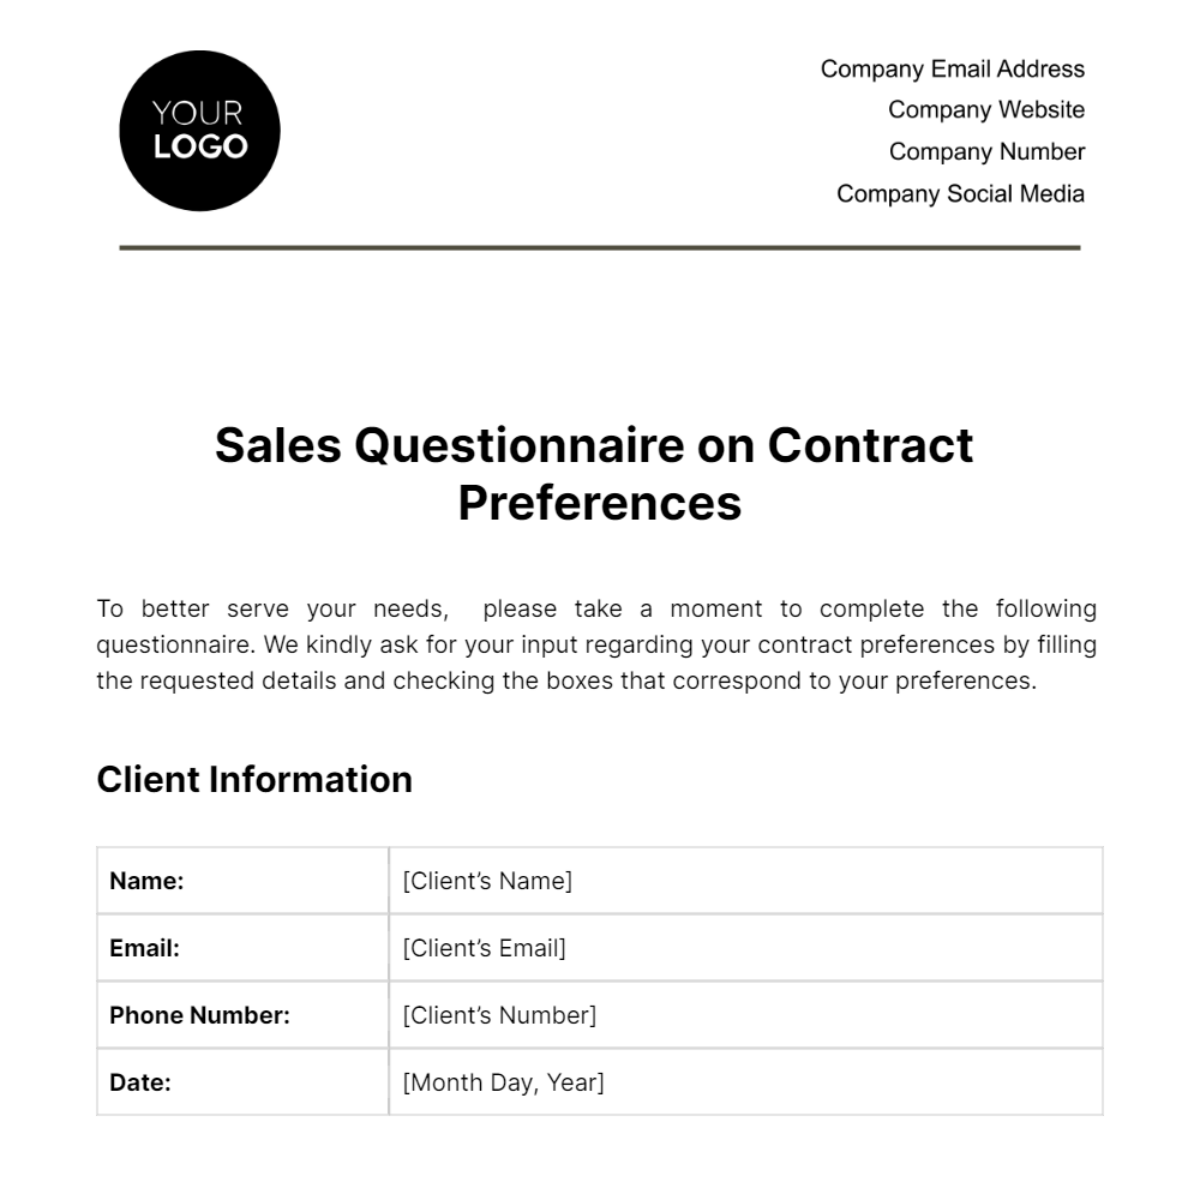 Free Sales Questionnaire on Contract Preferences Template